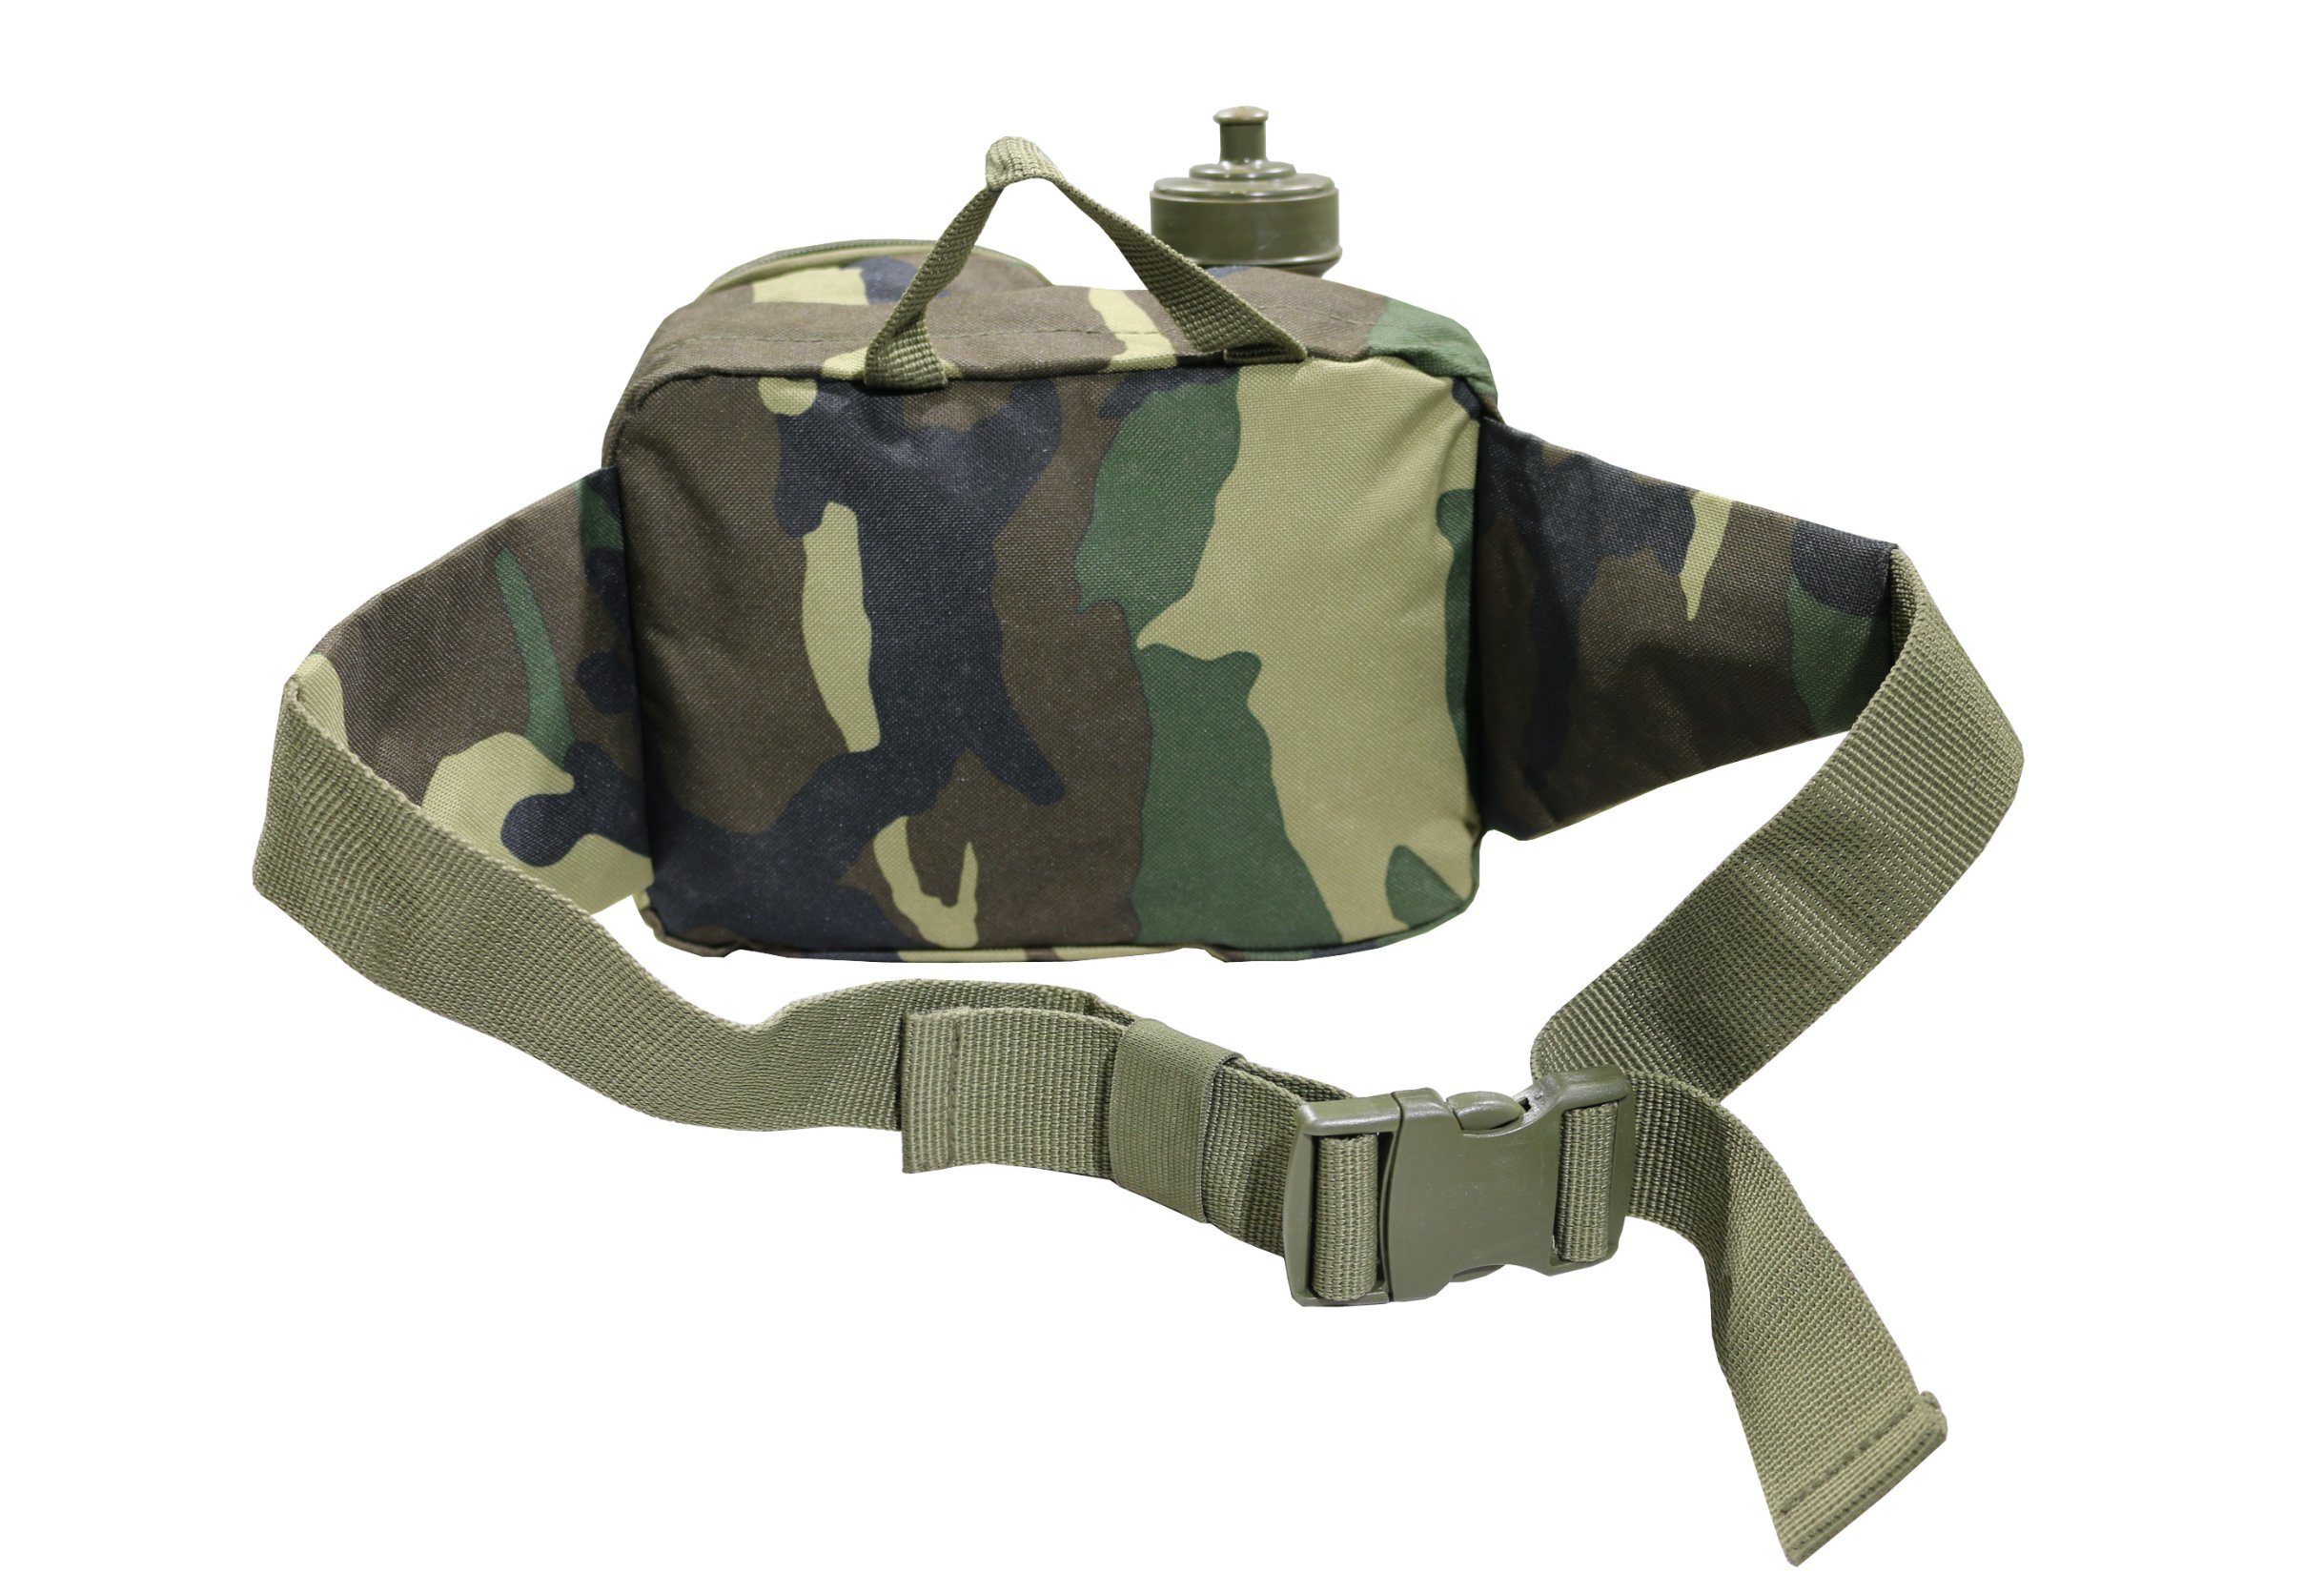 Military Tactical Waist Bag with Bottle Holder